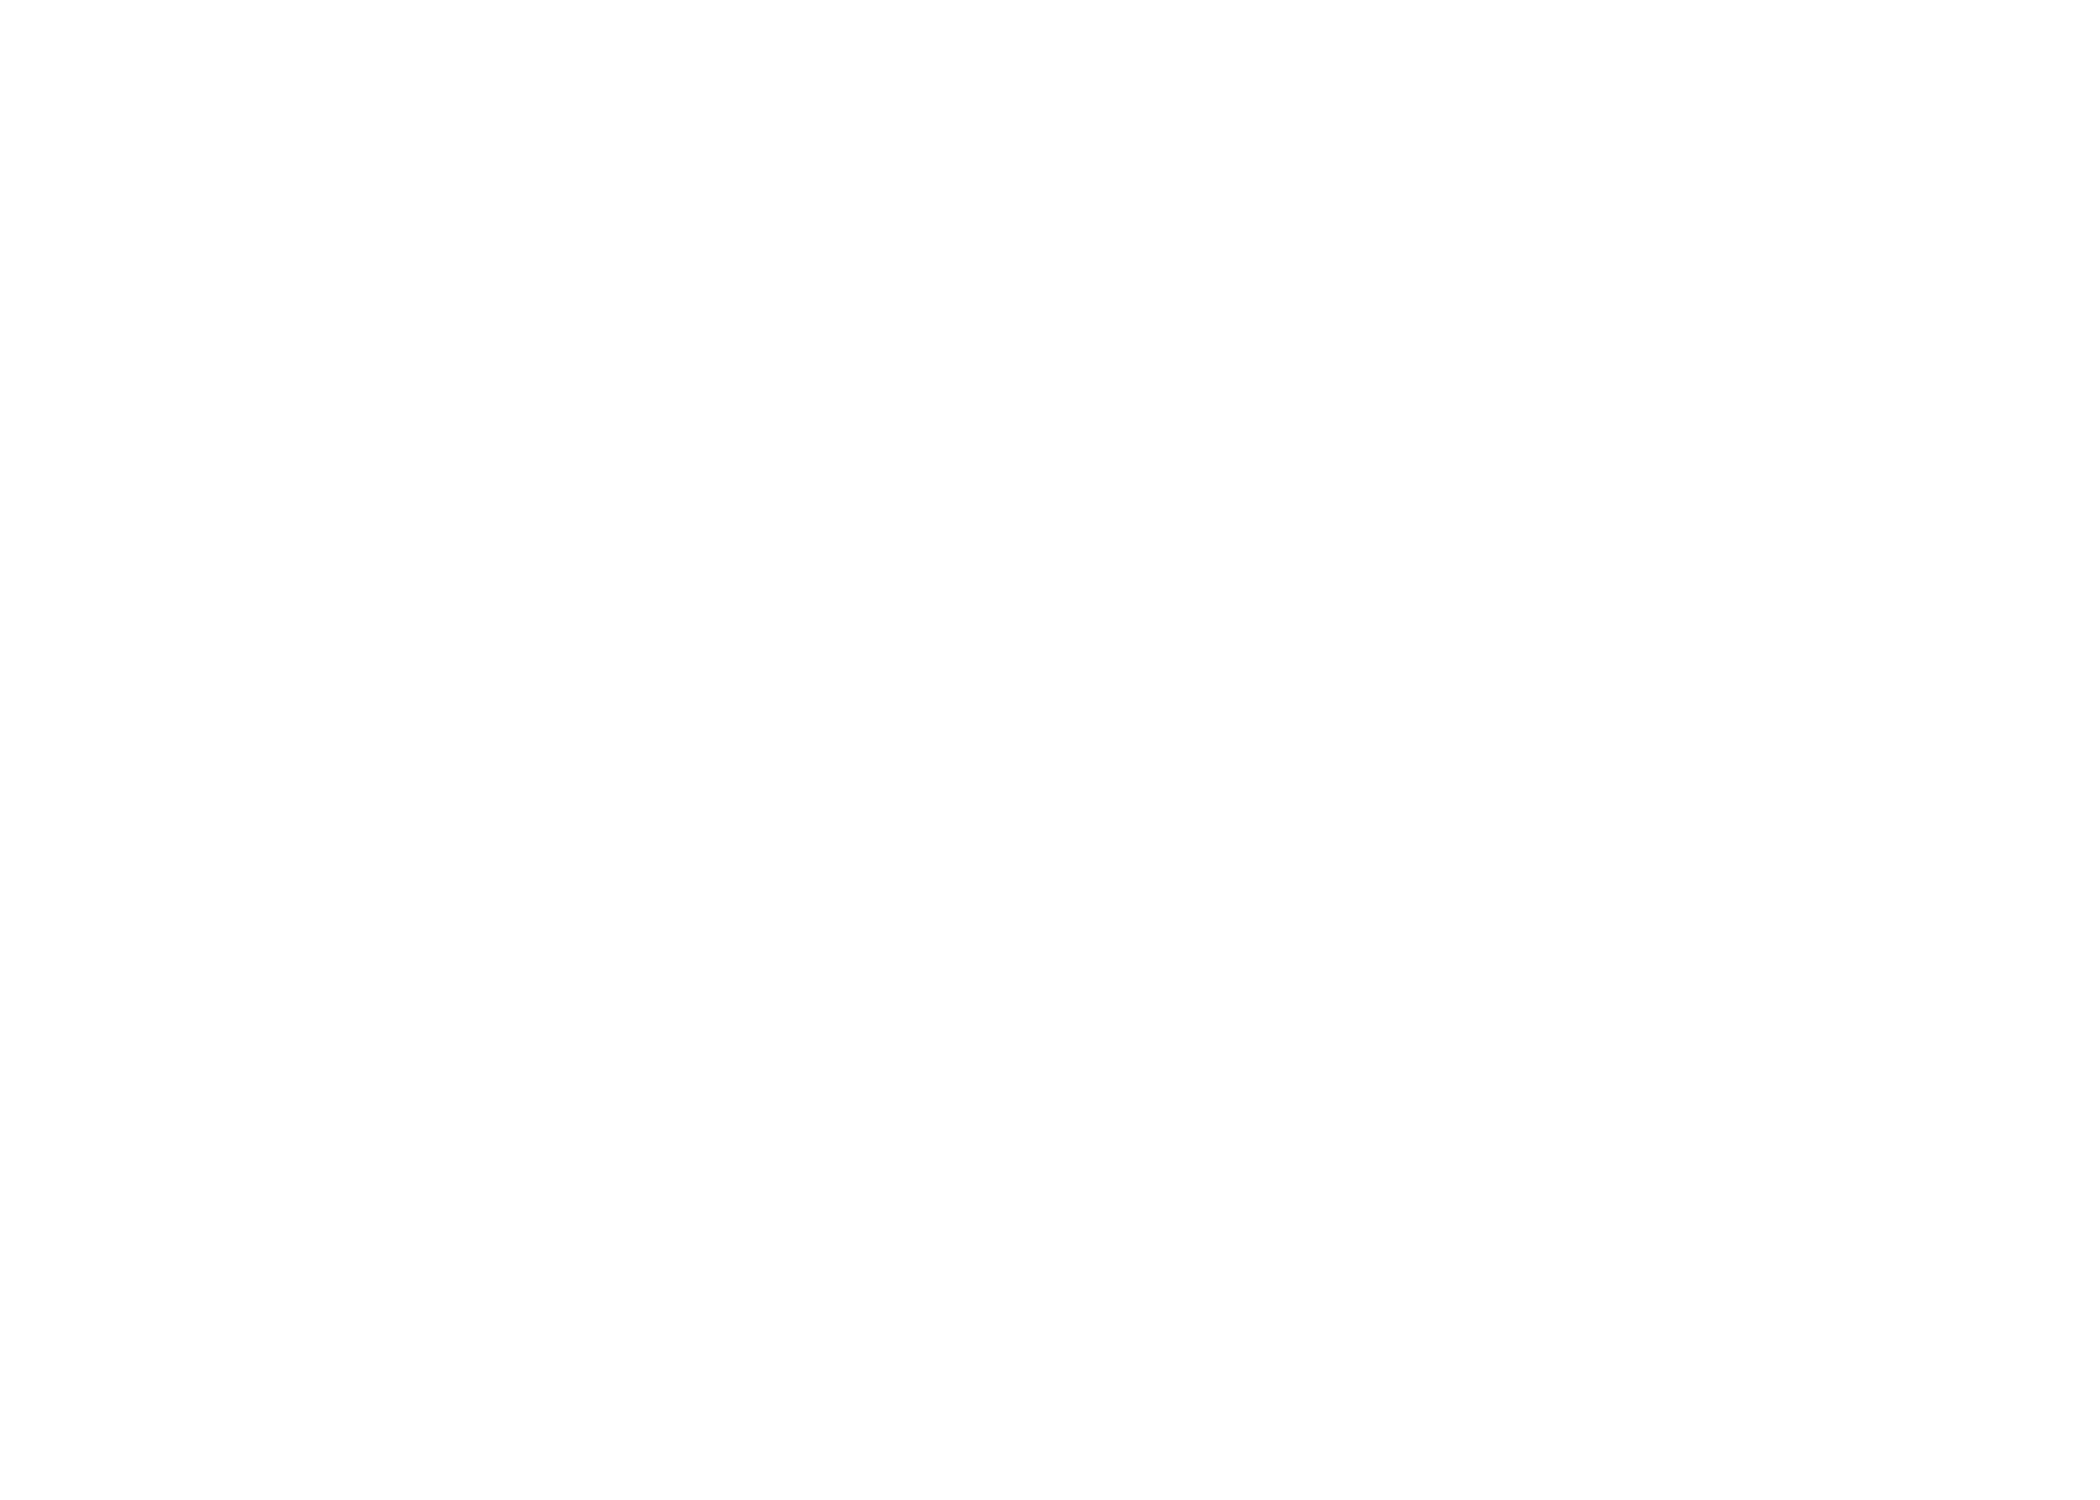 FGPG Recognizes Over 15 Years of WBENC Certification